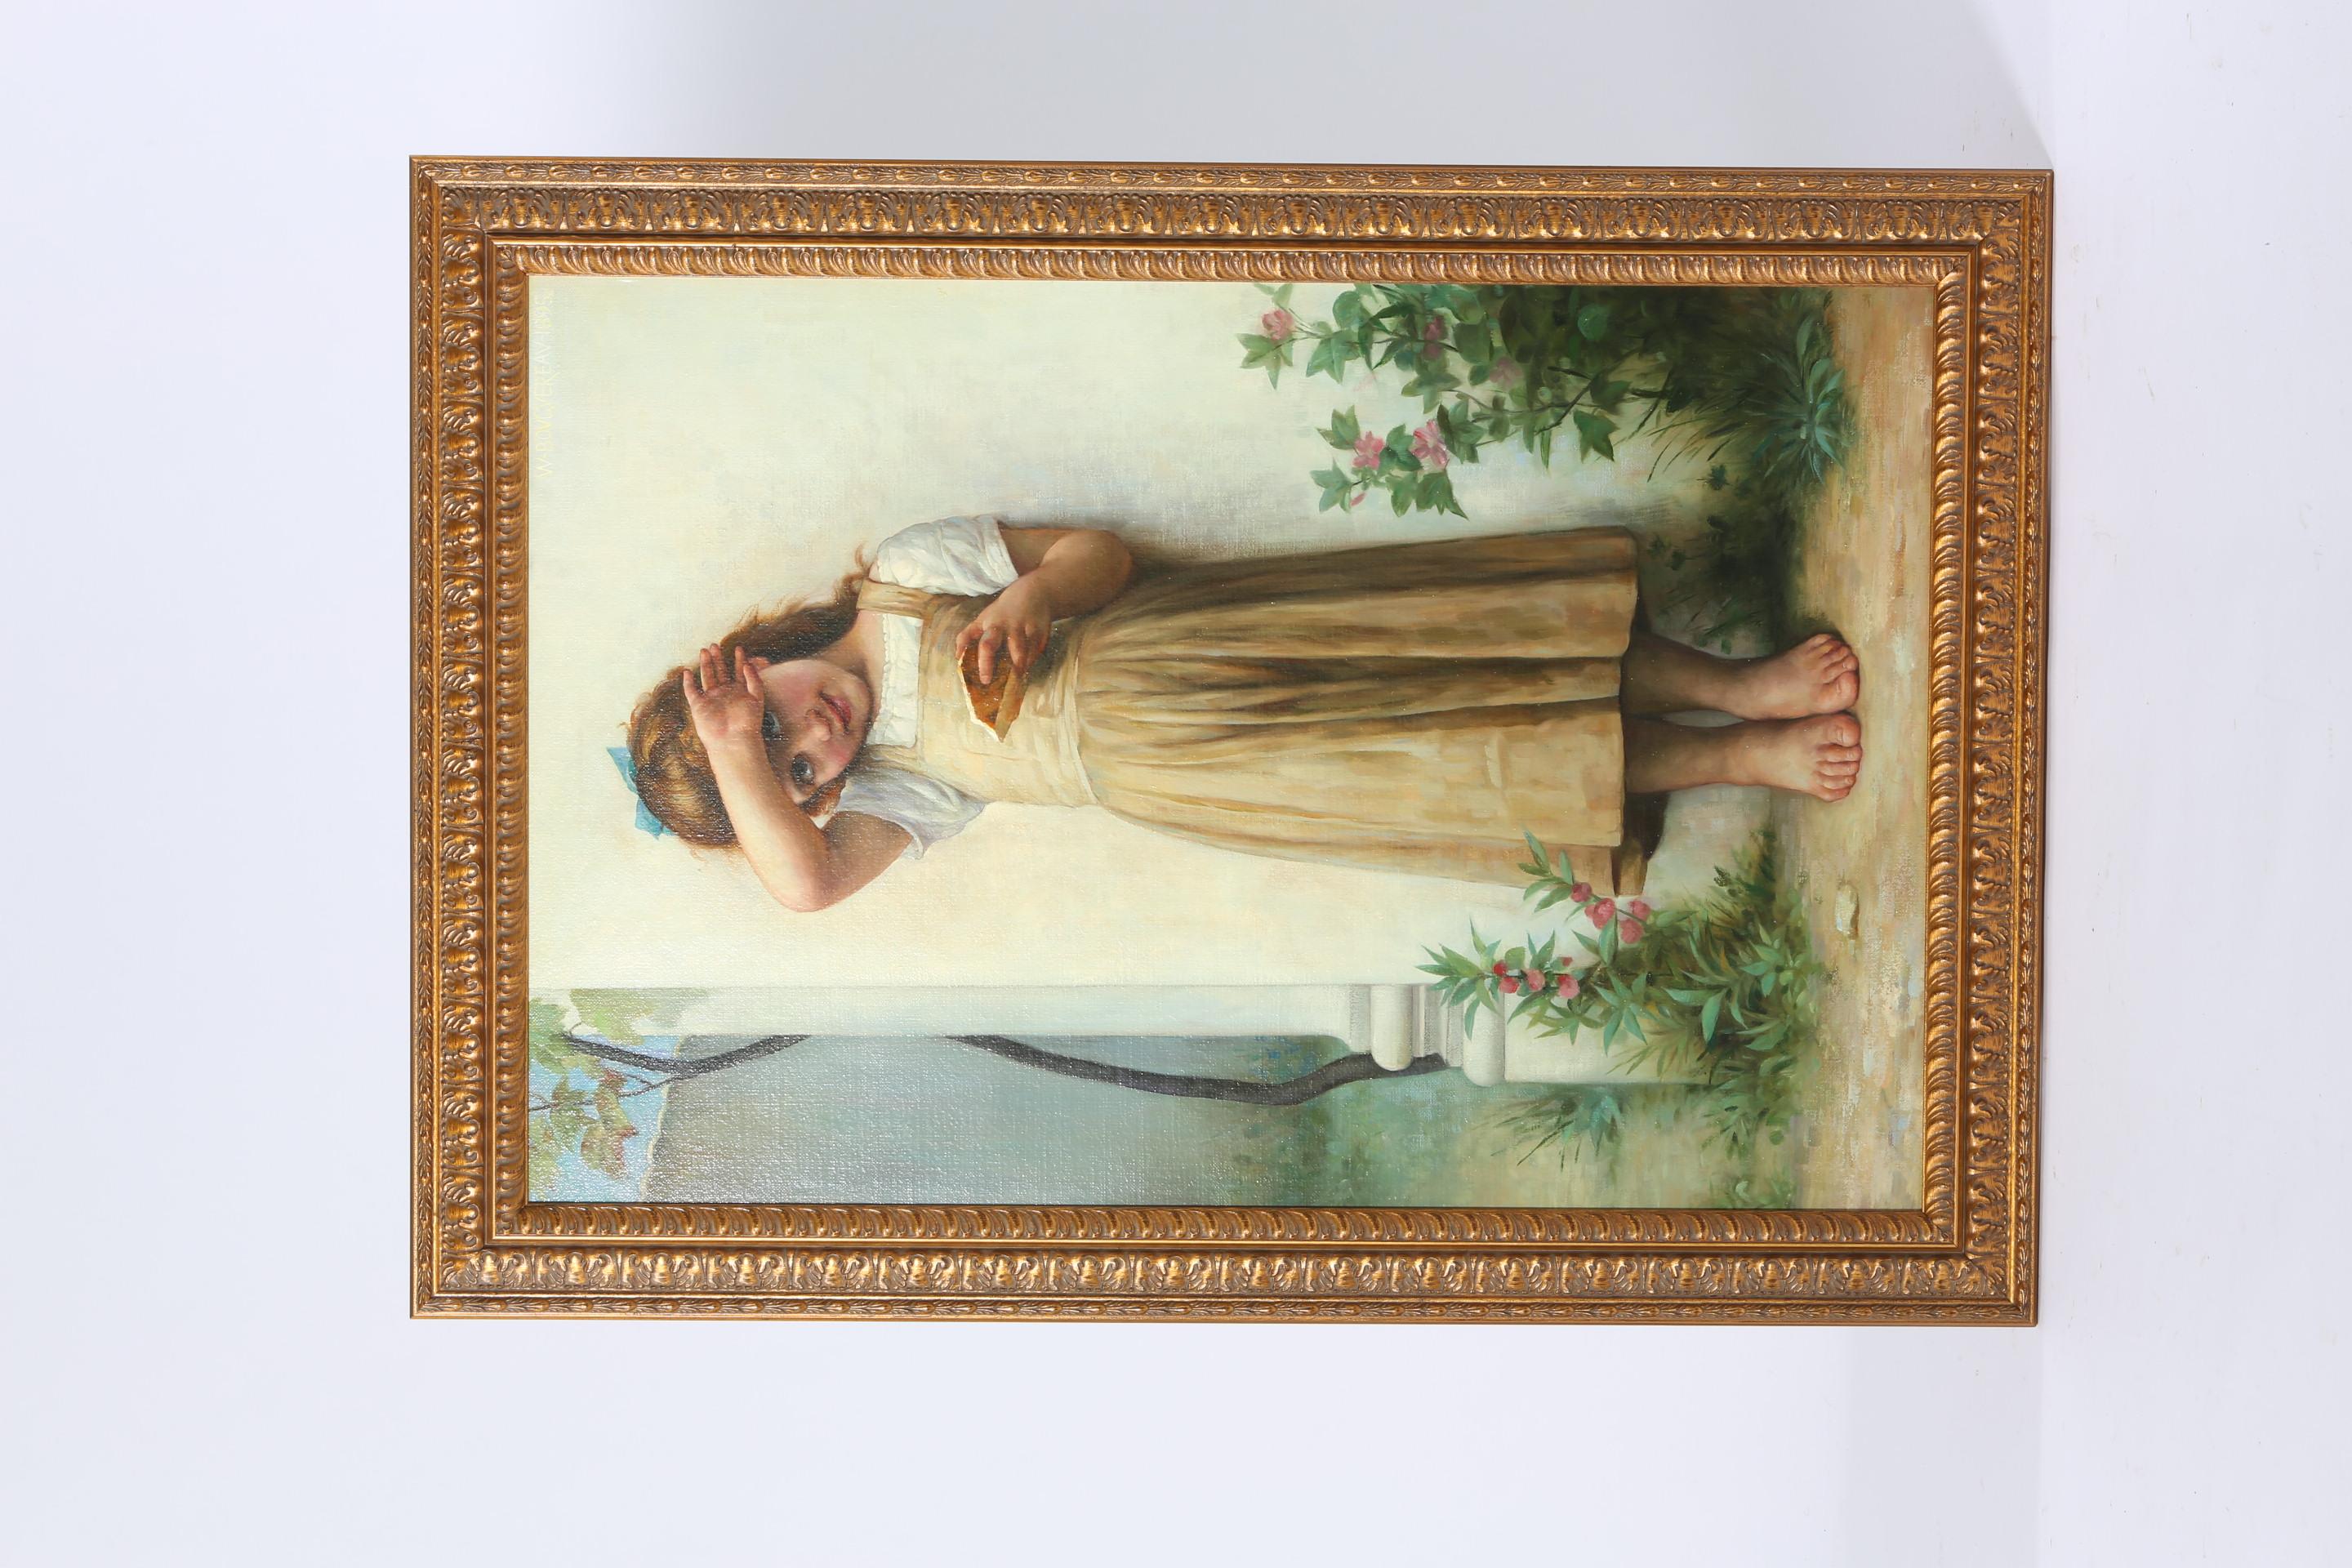 Large giltwood framed oil on canvas painting of a young girl with book after the original by William Adolphe Bouguereau (1825-1905).  The painting is in great condition.  Minor wear consistent with age / use. Artist signature at the left hand